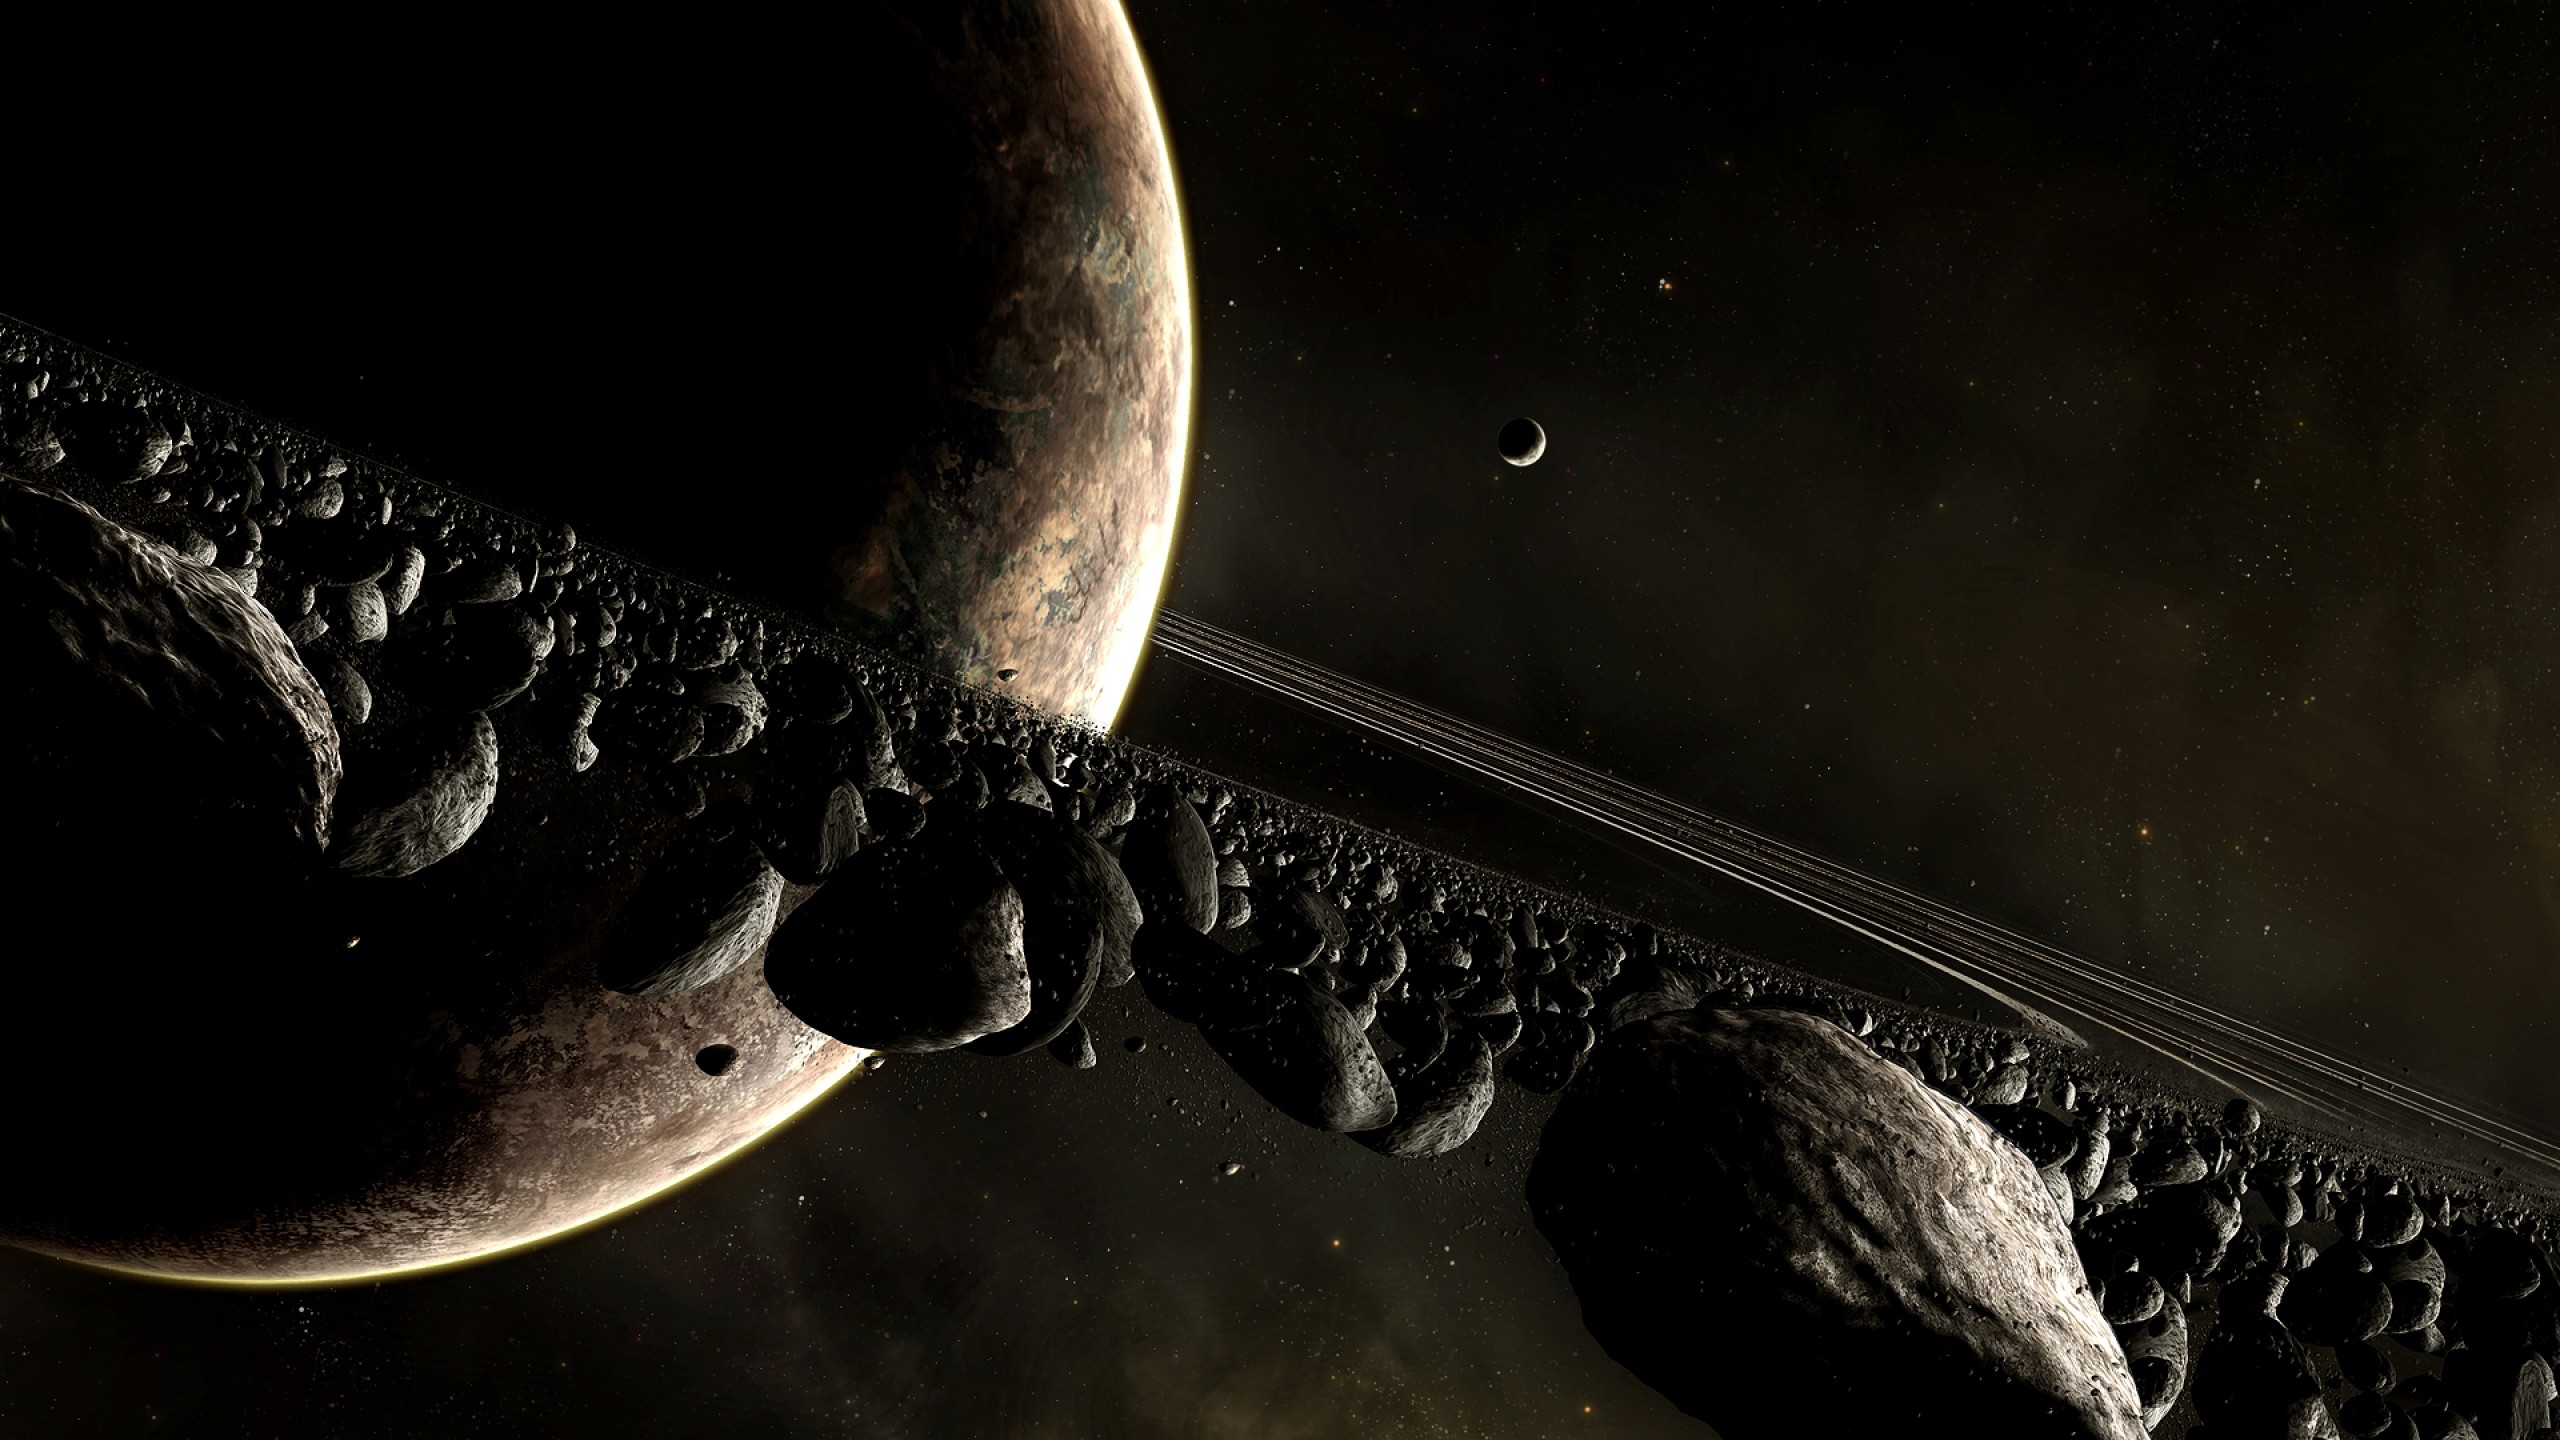 2560x1440  Wallpaper universe planet, planet, disaster, space